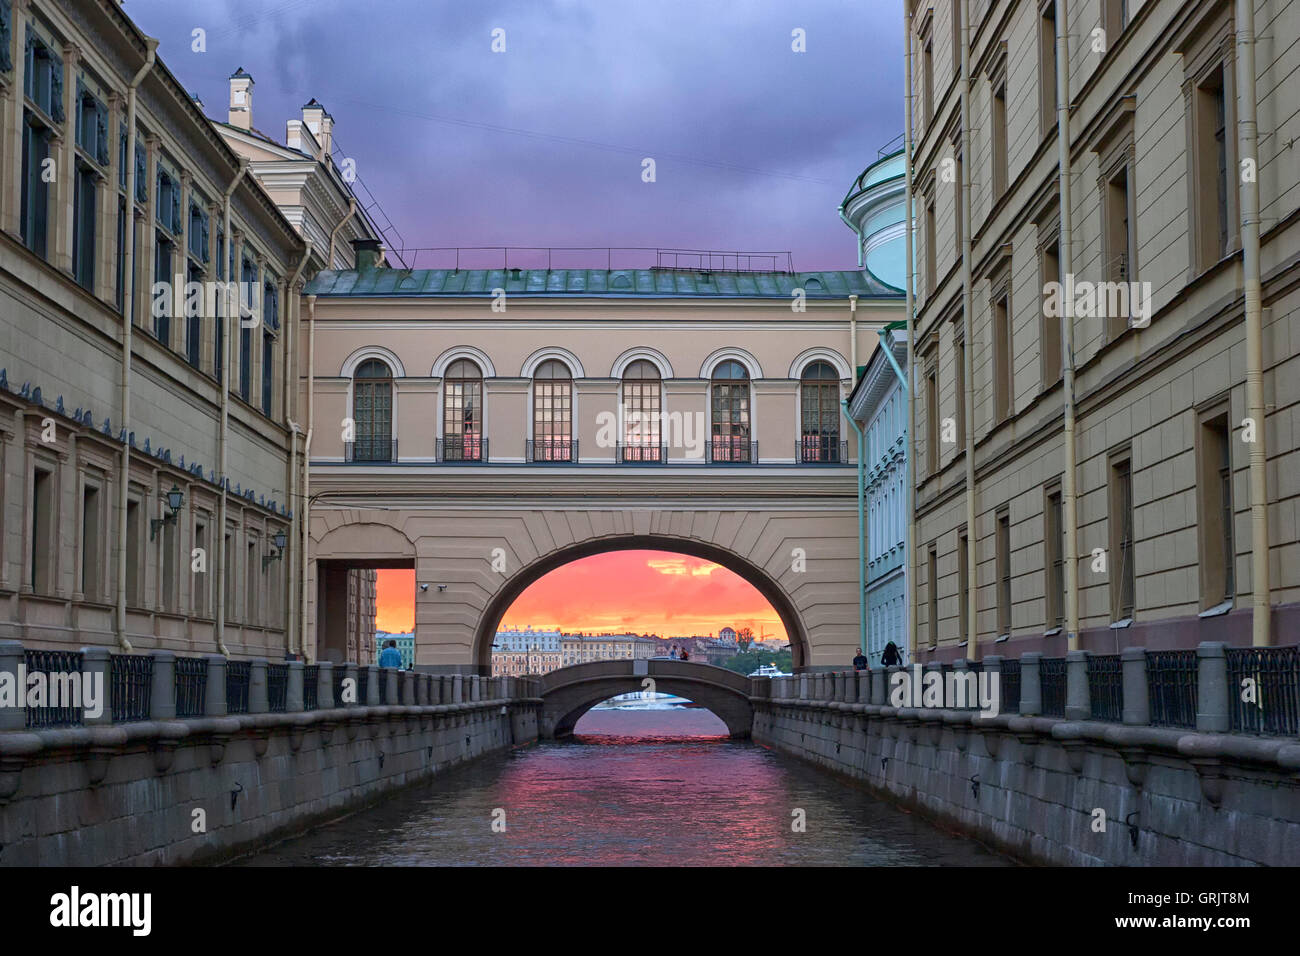 An archway over a canal in St Petersburg, Russia Stock Photo